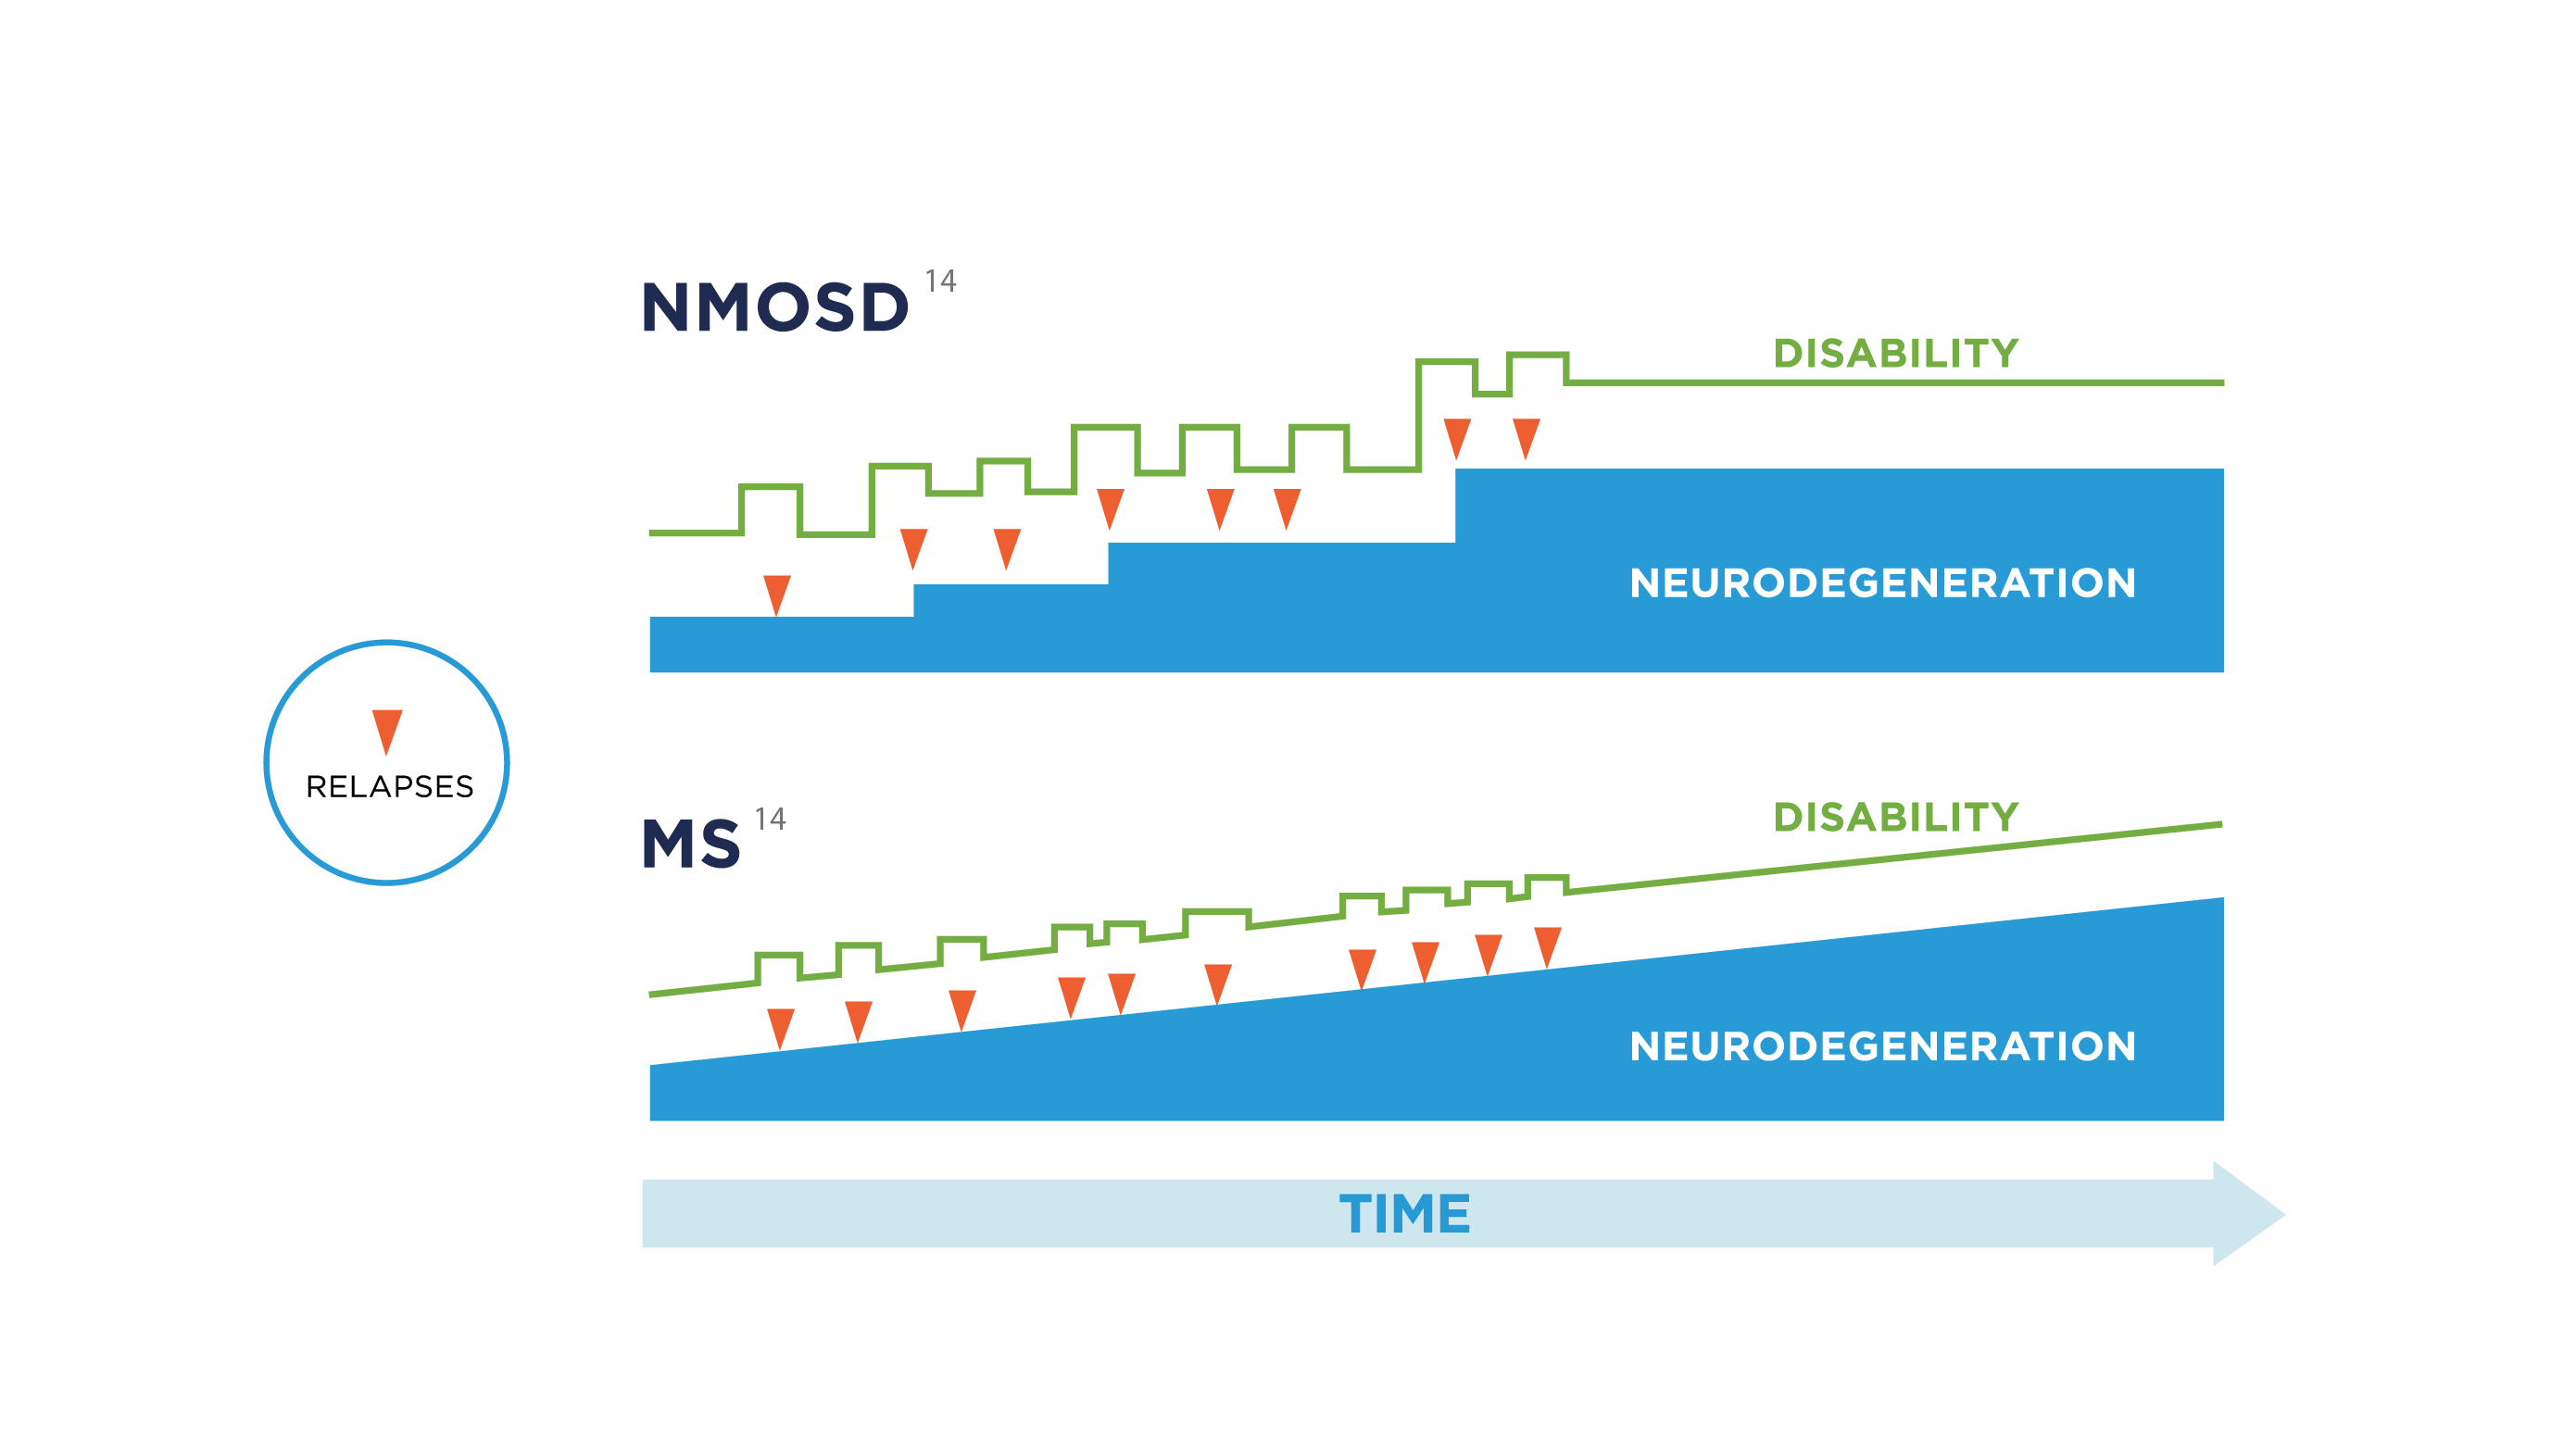 The amount of neurodegeneration that people with NMOSD suffer is almost exclusively related to their relapses. This is different from MS, which is a progressive disease from the start, no matter how it manifests, as disability tends to accumulate relentlessly.<sup>14</sup>